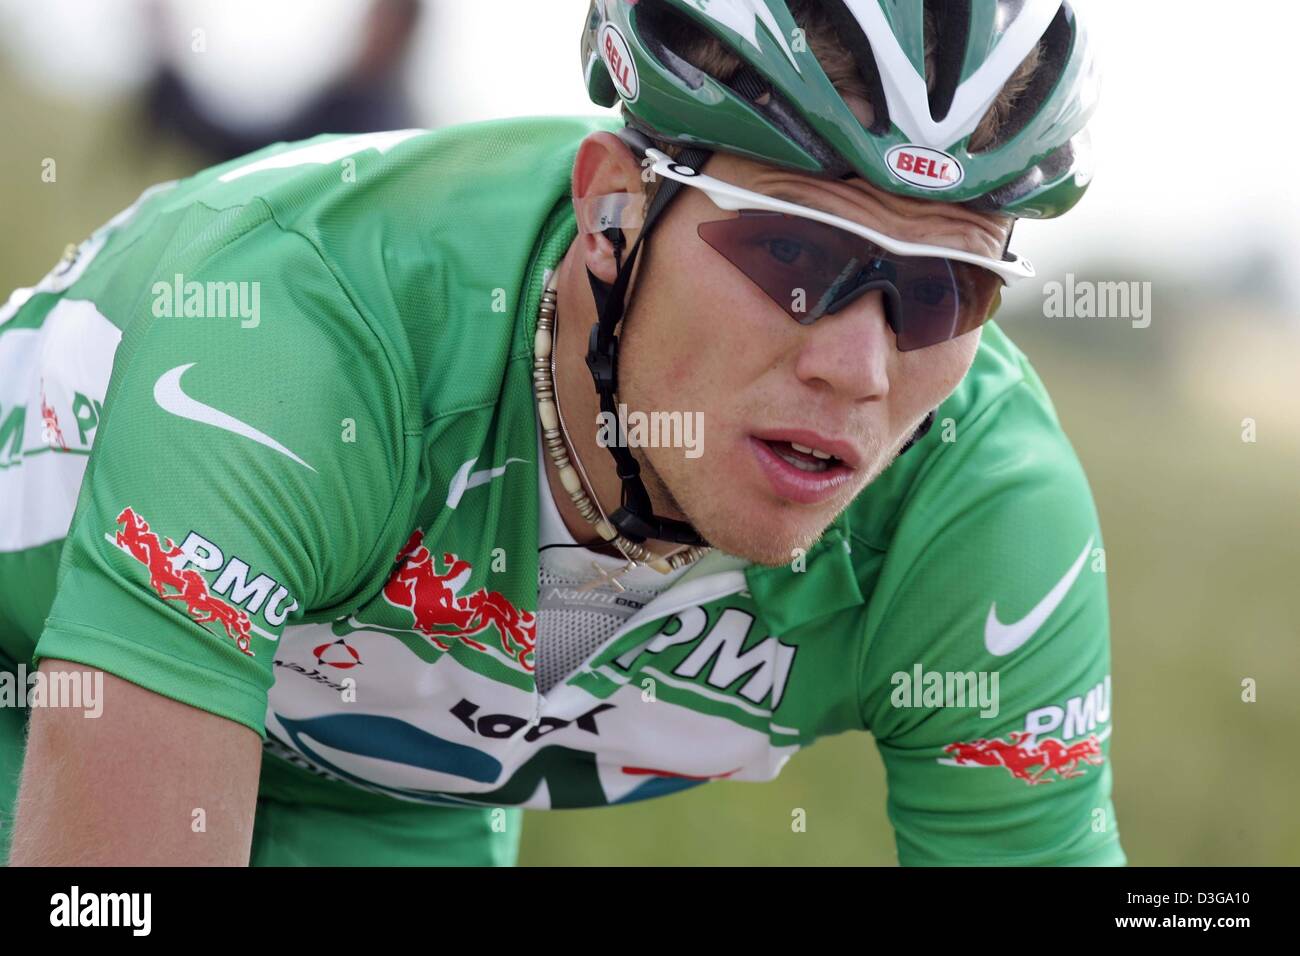 (dpa) - Norwegian cyclist Thor Hushovd of team Credit Agricole wears the green jersey of the best sprinter during the second stage of the Tour de France in Namur, Belgium, 5 July 2004. The second and 197km long stage of the 91st Tour de France cycling race took the cyclists from Charleroi to Namur. A second place finish later in the stage was enough for Hushovd to take over the yel Stock Photo